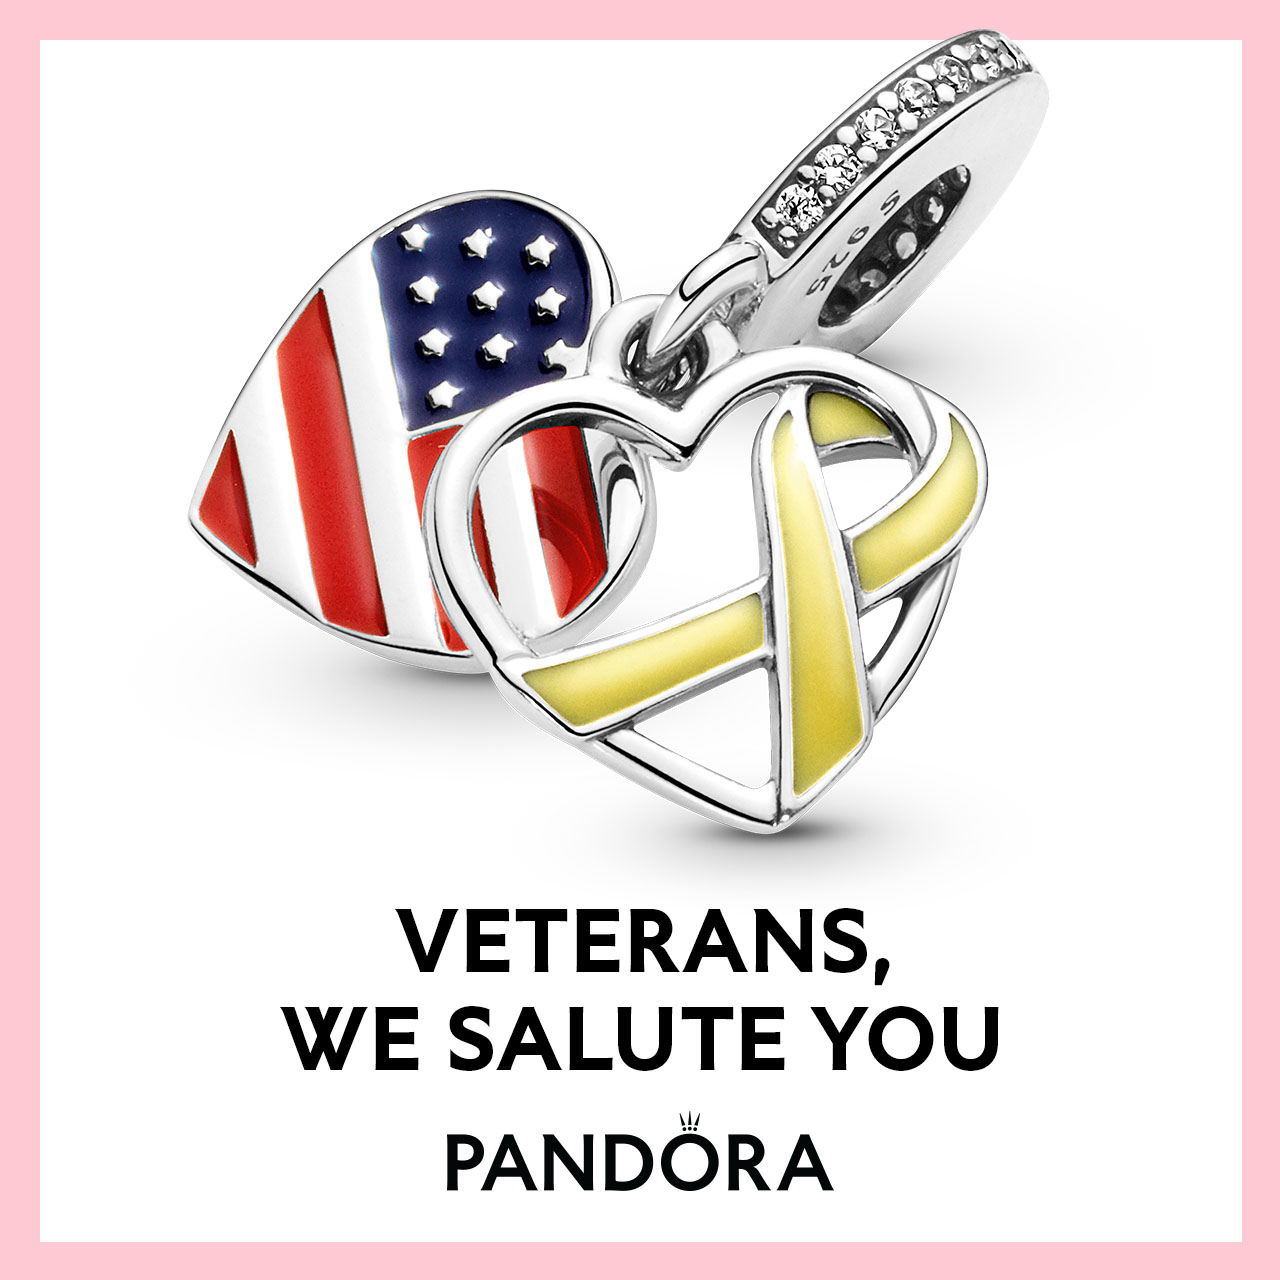 Pandora Campaign 55 To Americas Veterans and their families We salute you. We honor you. We thank you. EN 1280x1280 1